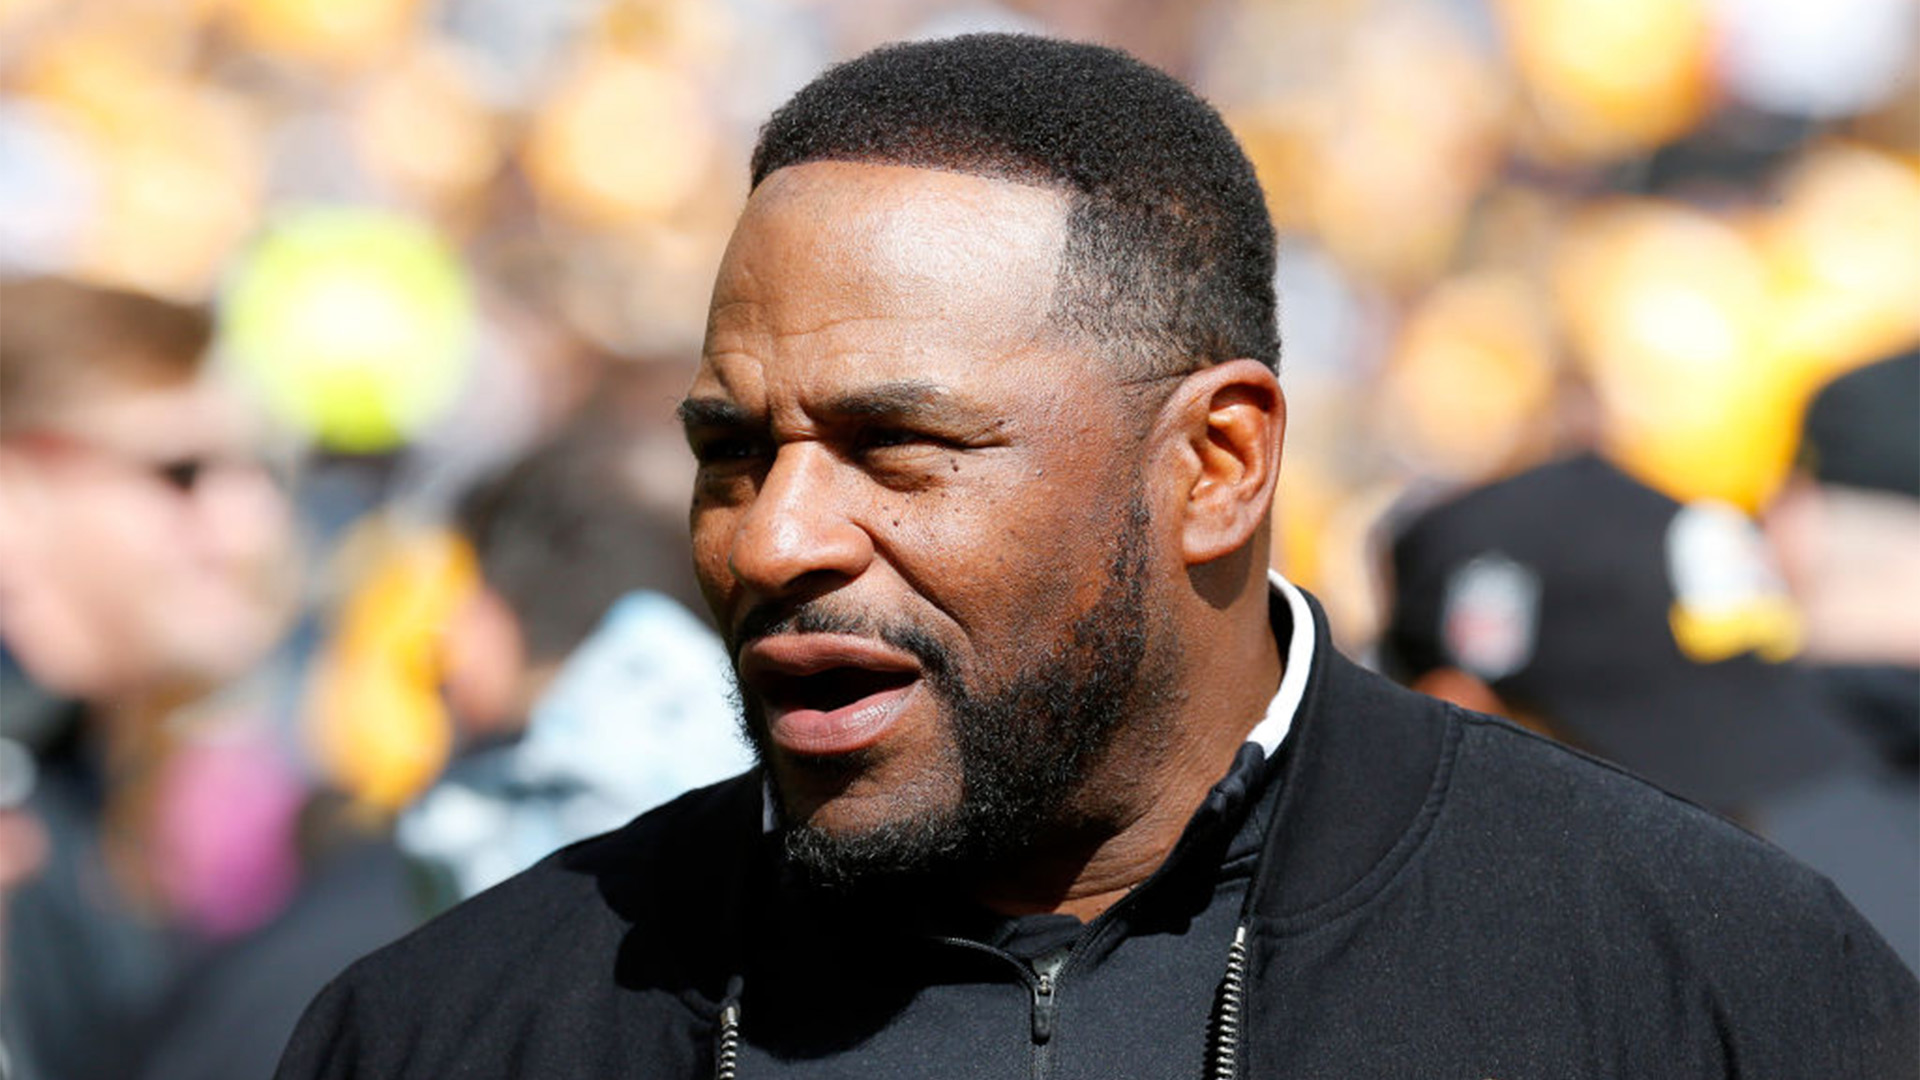 Jerome Bettis Gets Emotional In A Viral Clip As He Completes His Final Exams To Graduate From Notre Dame 28 Years After Leaving